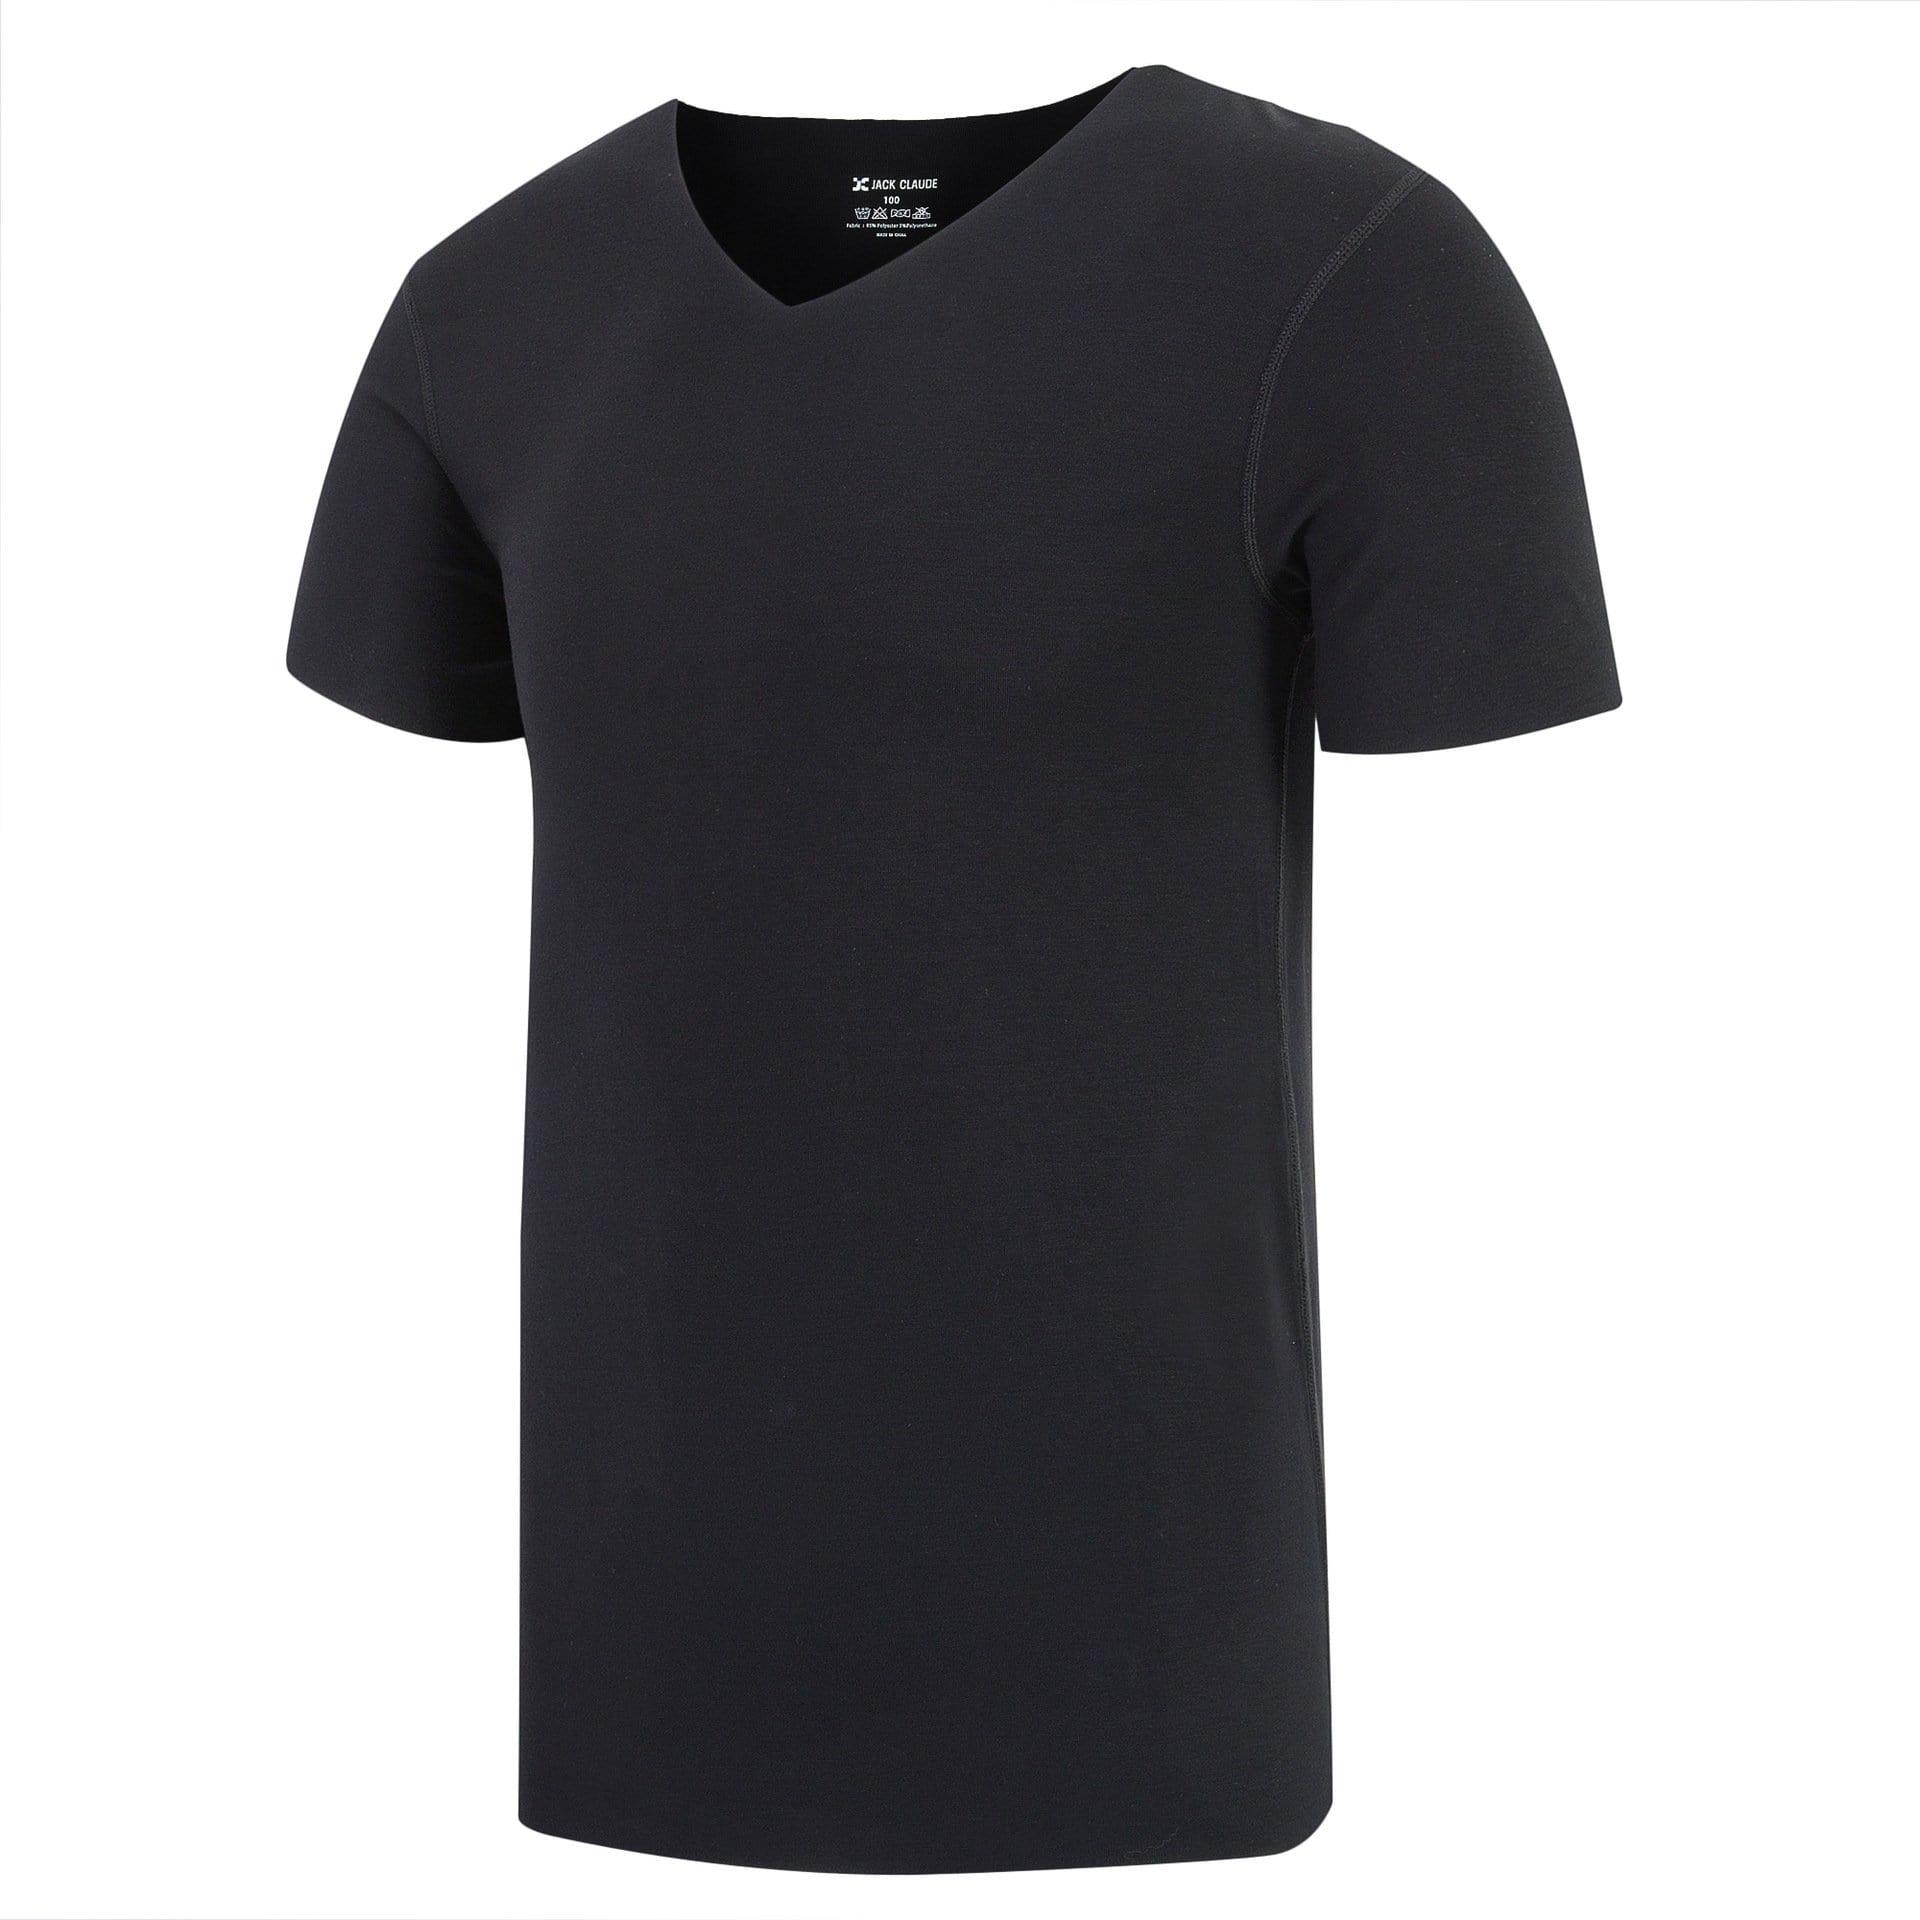 ezy2find Men's Shirts Black / 3XL Cut half-sleeved solid color bottoming shirtr bottoming shirt